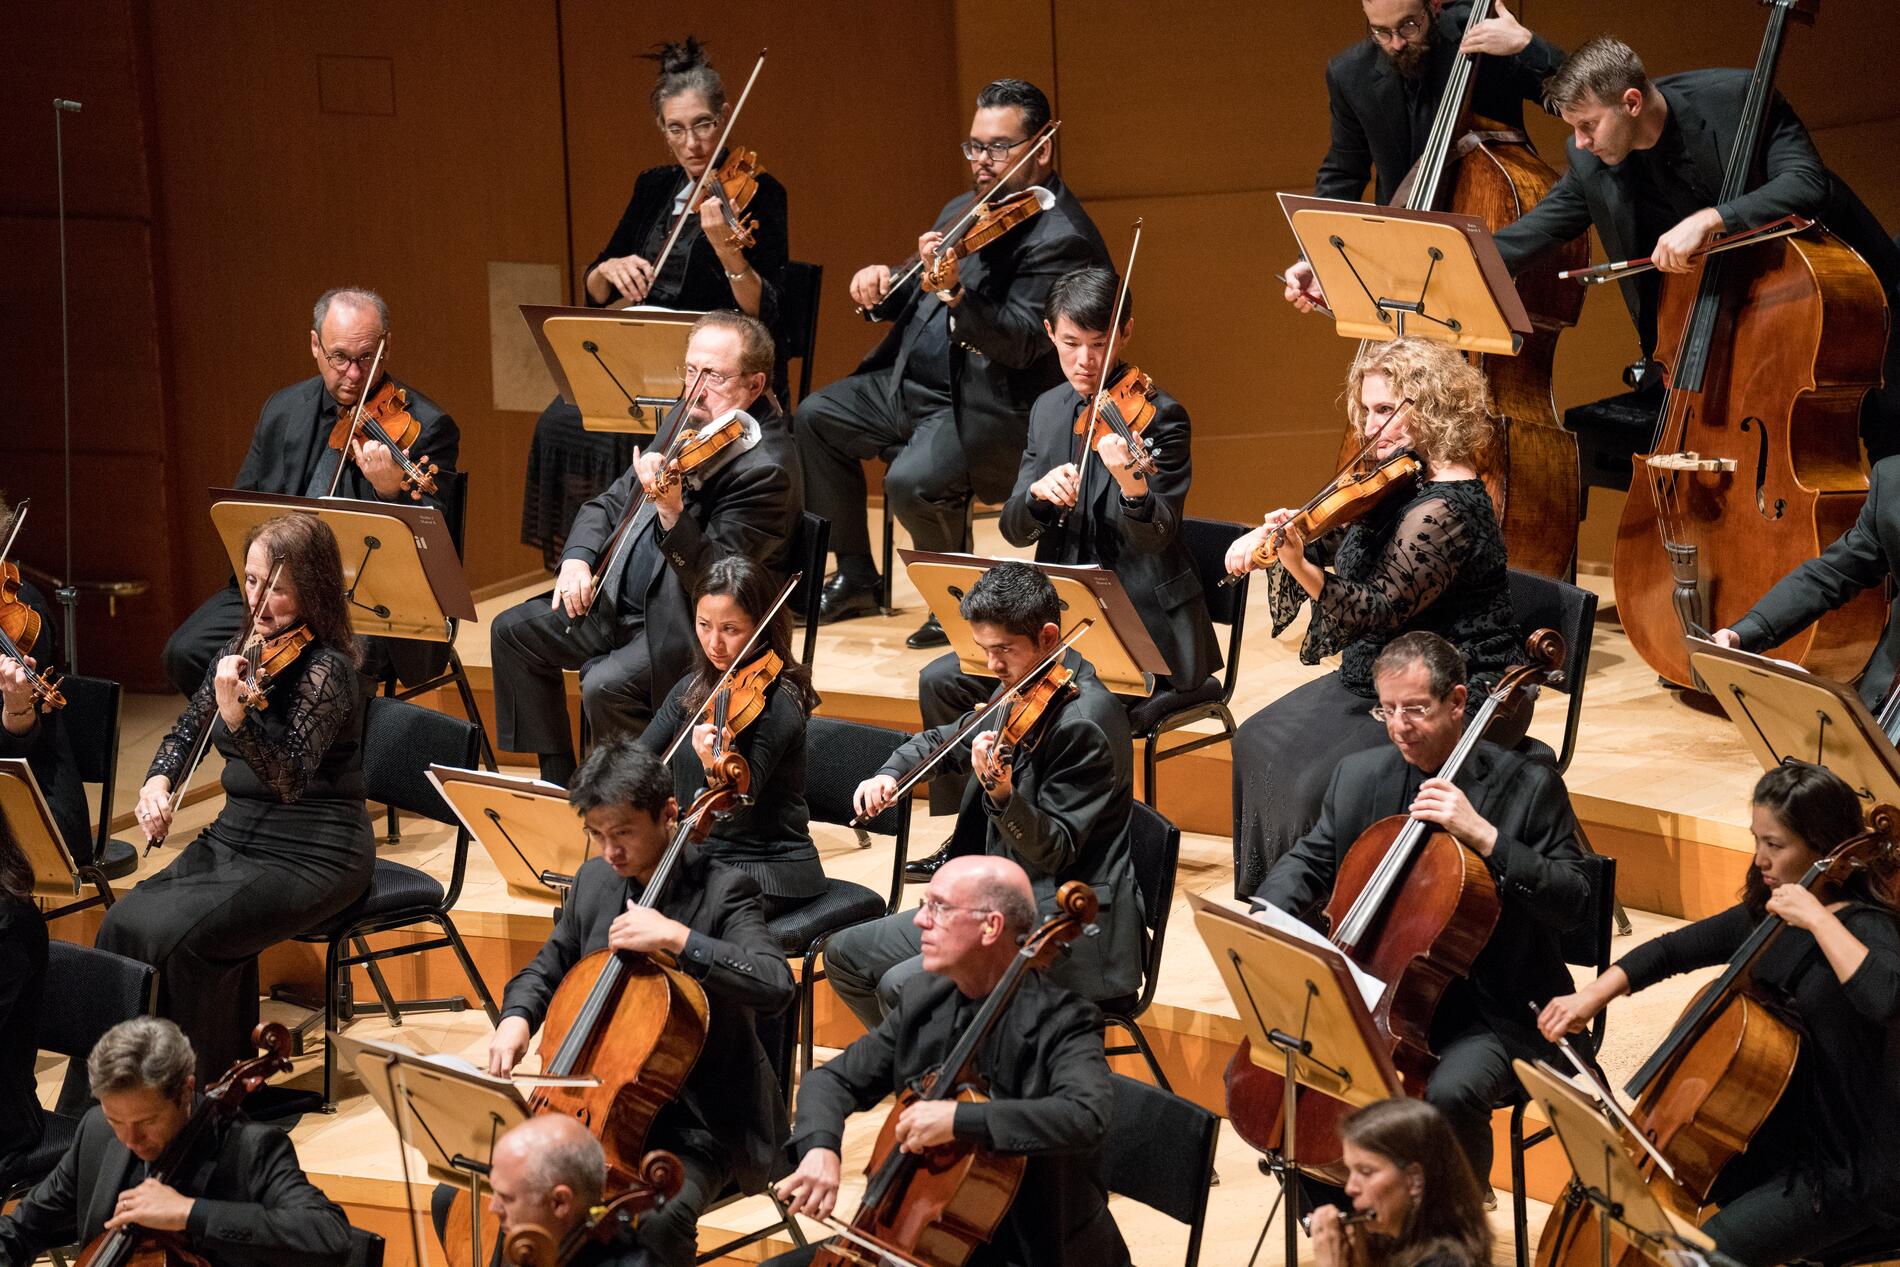 Members of the Los Angeles Philharmonic performing on stage at Walt Disney Concert Hall